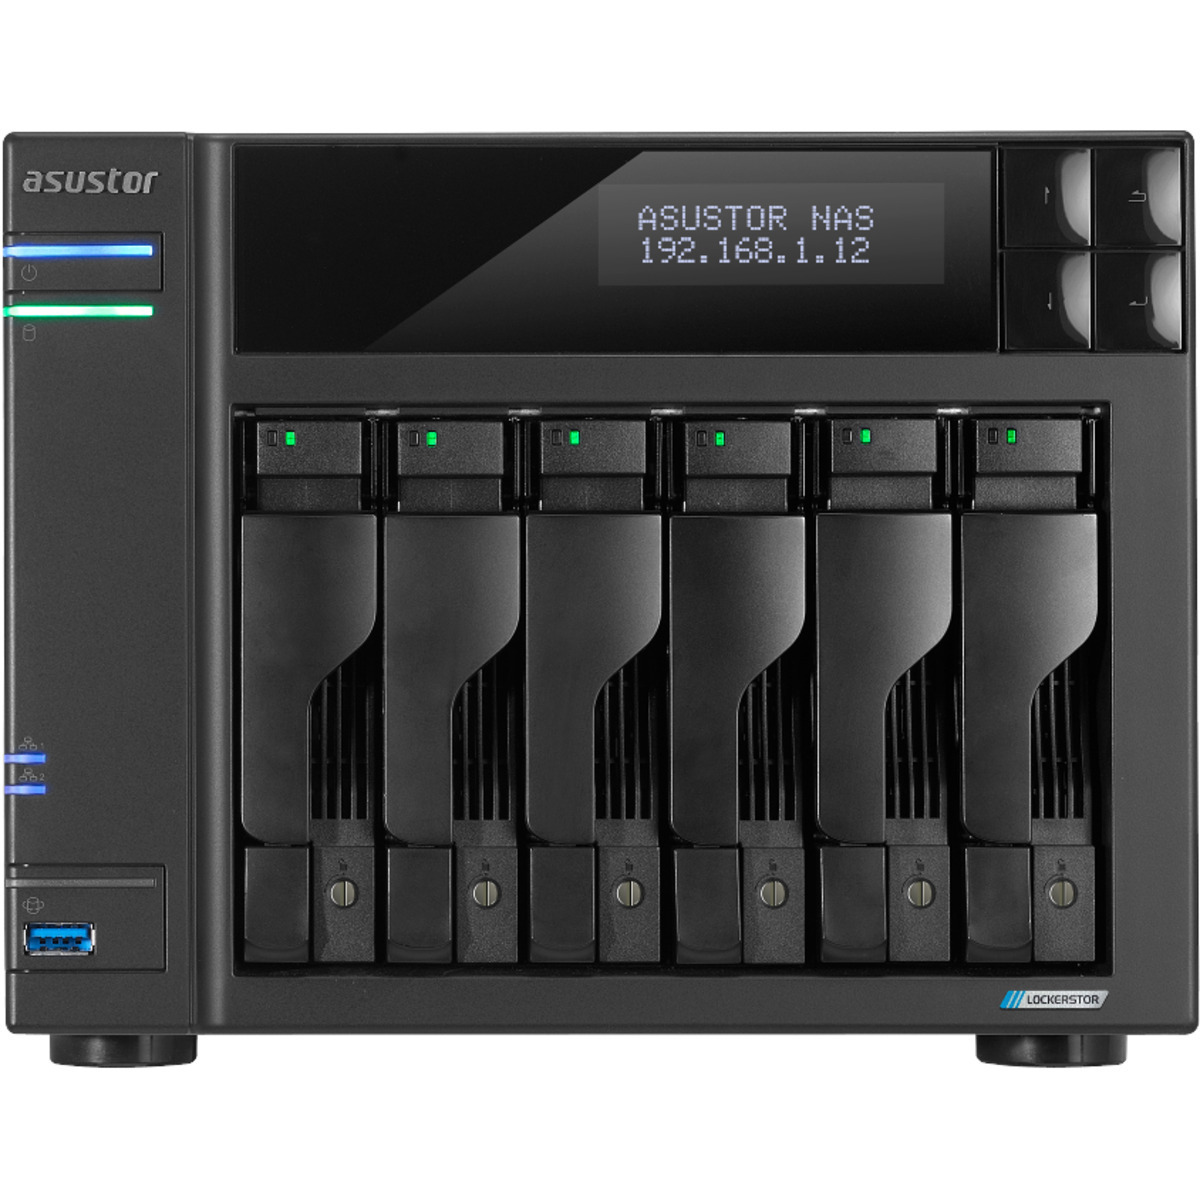 ASUSTOR LOCKERSTOR 6 Gen2 AS6706T 2.5tb 6-Bay Desktop Multimedia / Power User / Business NAS - Network Attached Storage Device 5x500gb Samsung 870 EVO MZ-77E500BAM 2.5 560/530MB/s SATA 6Gb/s SSD CONSUMER Class Drives Installed - Burn-In Tested - FREE RAM UPGRADE LOCKERSTOR 6 Gen2 AS6706T